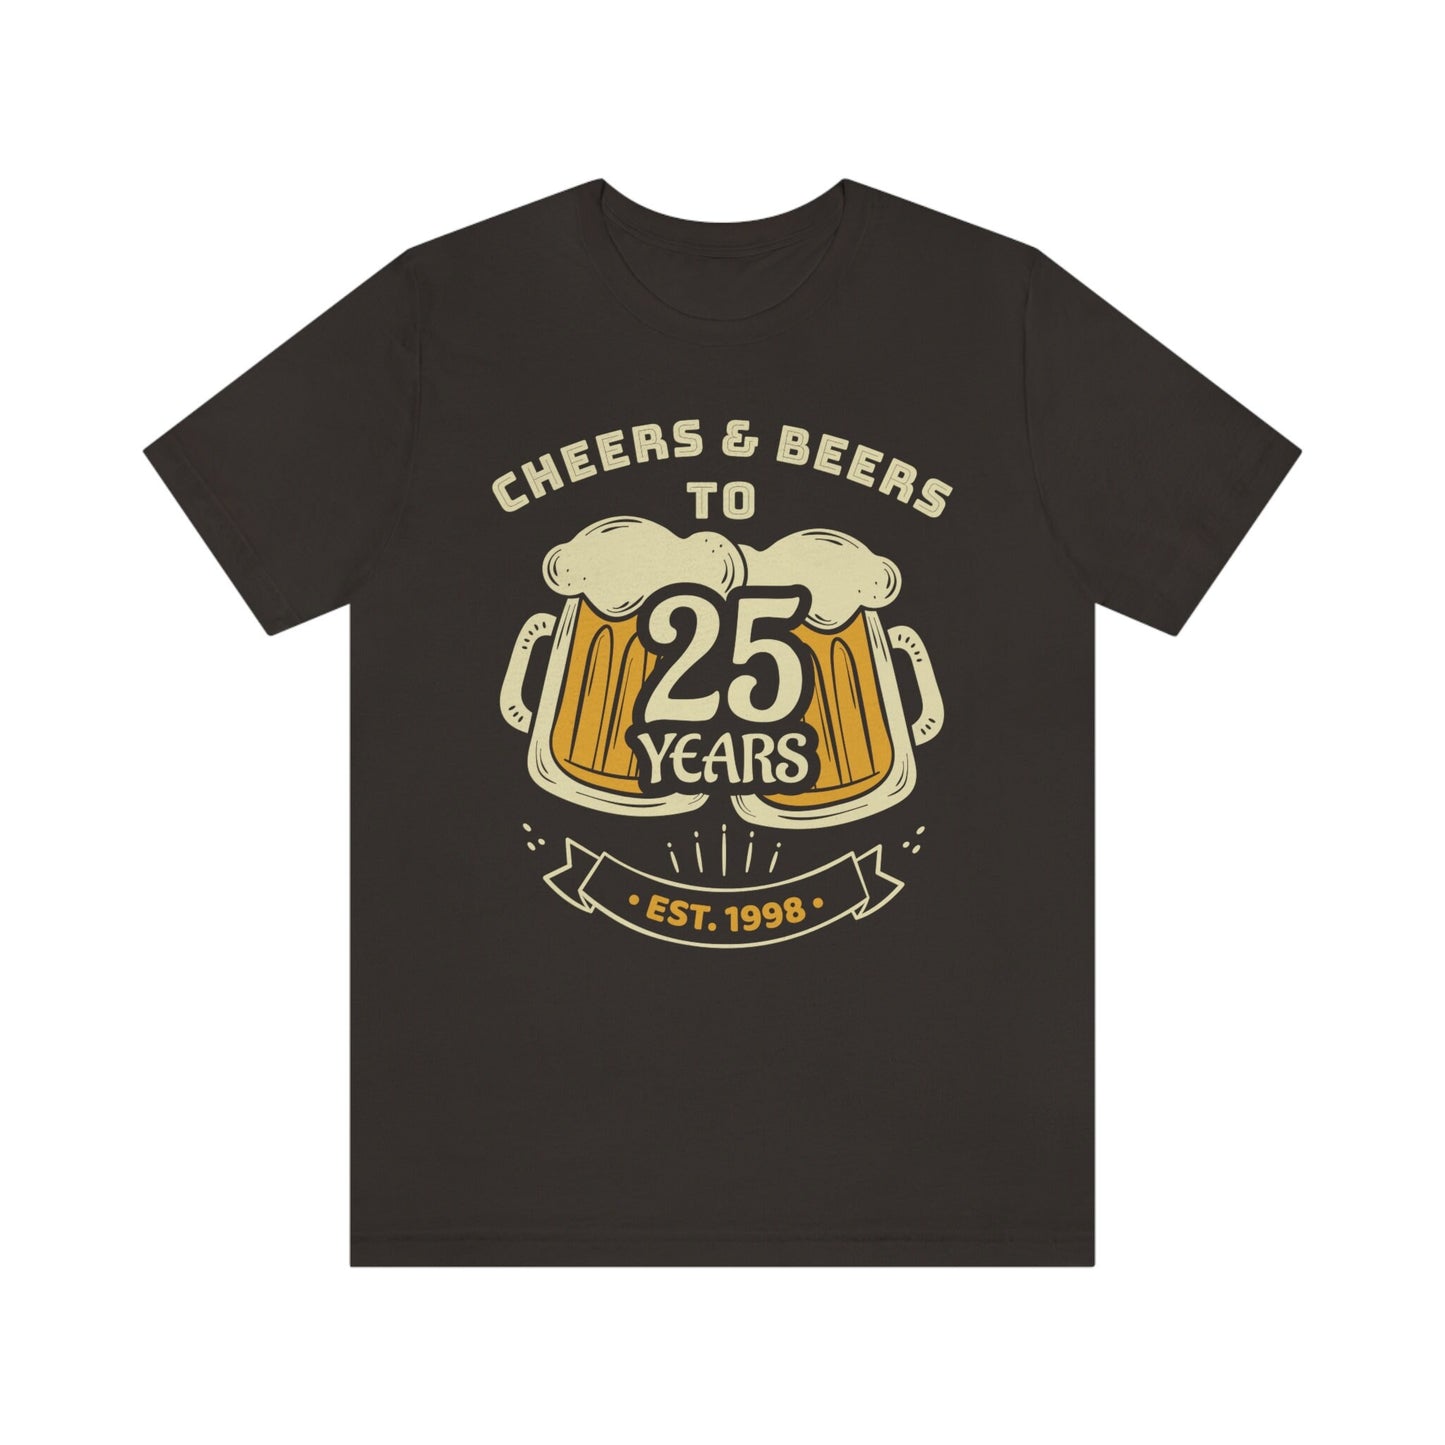 25th Birthday Gift Shirt for Men or Women - Cheers and Beers to 25 Years